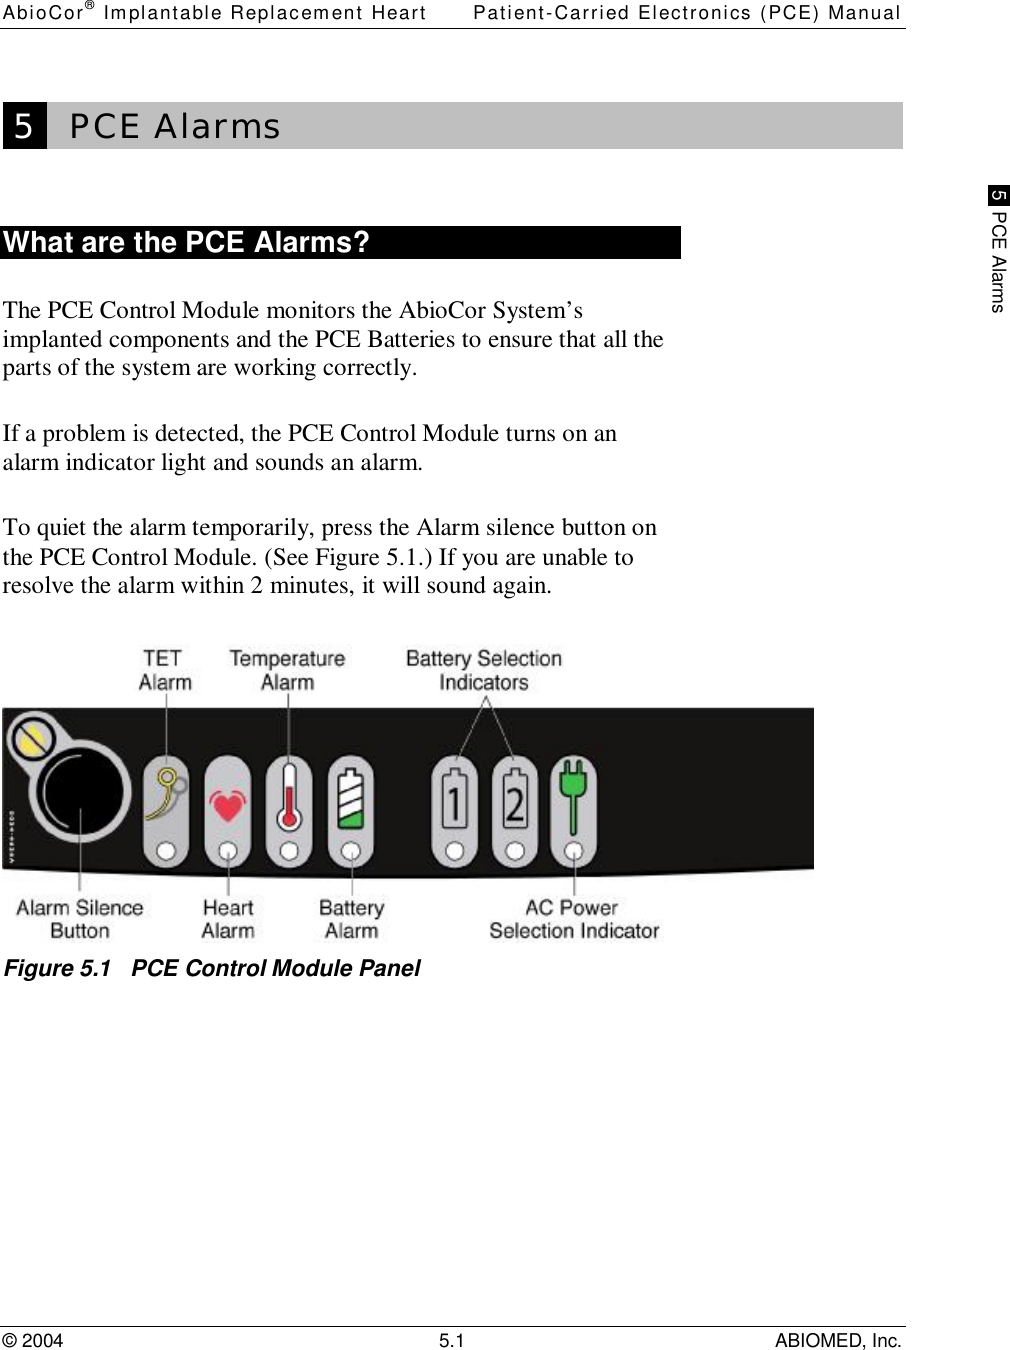 AbioCor® Implantable Replacement Heart Patient-Carried Electronics (PCE) Manual© 2004 5.1 ABIOMED, Inc. 5  PCE Alarms 5   PCE AlarmsWhat are the PCE Alarms?The PCE Control Module monitors the AbioCor System’simplanted components and the PCE Batteries to ensure that all theparts of the system are working correctly.If a problem is detected, the PCE Control Module turns on analarm indicator light and sounds an alarm.To quiet the alarm temporarily, press the Alarm silence button onthe PCE Control Module. (See Figure 5.1.) If you are unable toresolve the alarm within 2 minutes, it will sound again.Figure 5.1   PCE Control Module Panel